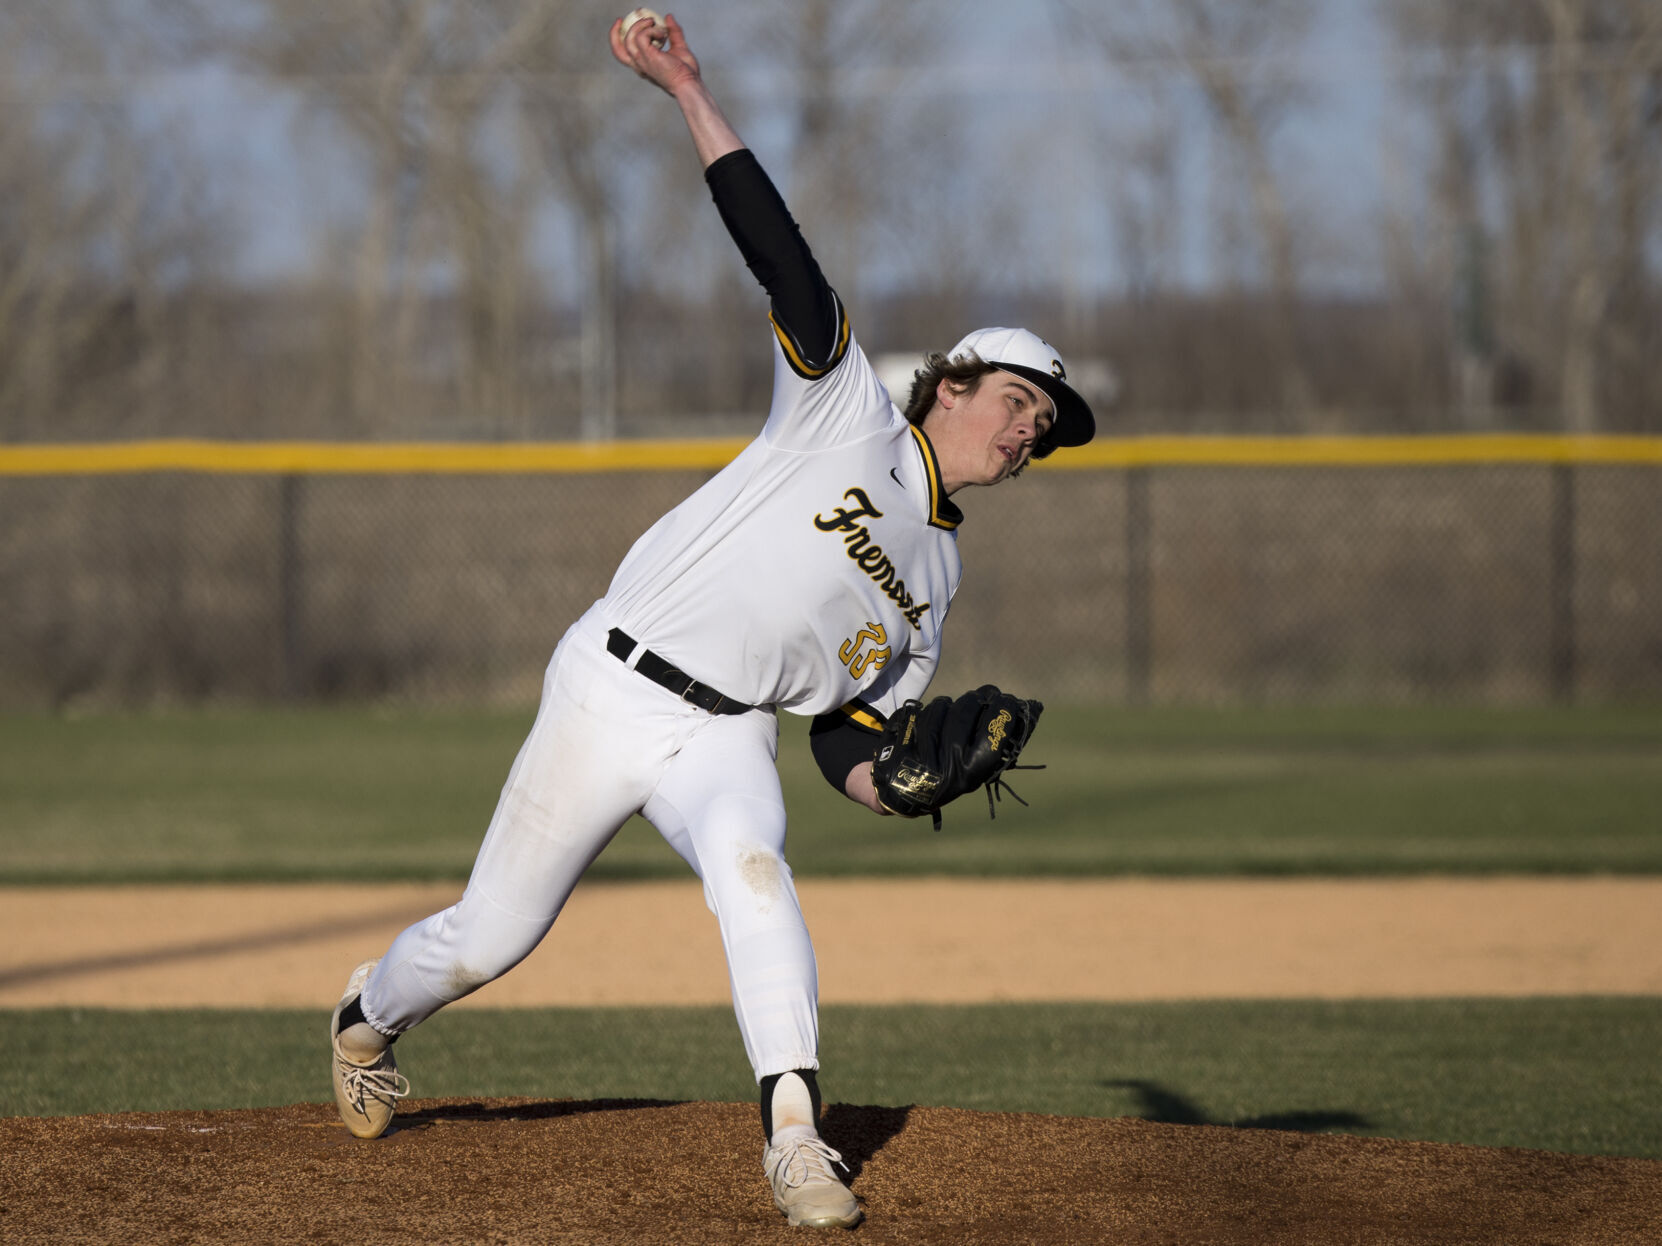 Noah Gartner and Brandon Berge Lead Strikeout Show as the Fremont Tigers Lose 3-1 to Millard South Despite Out-Hitting Them